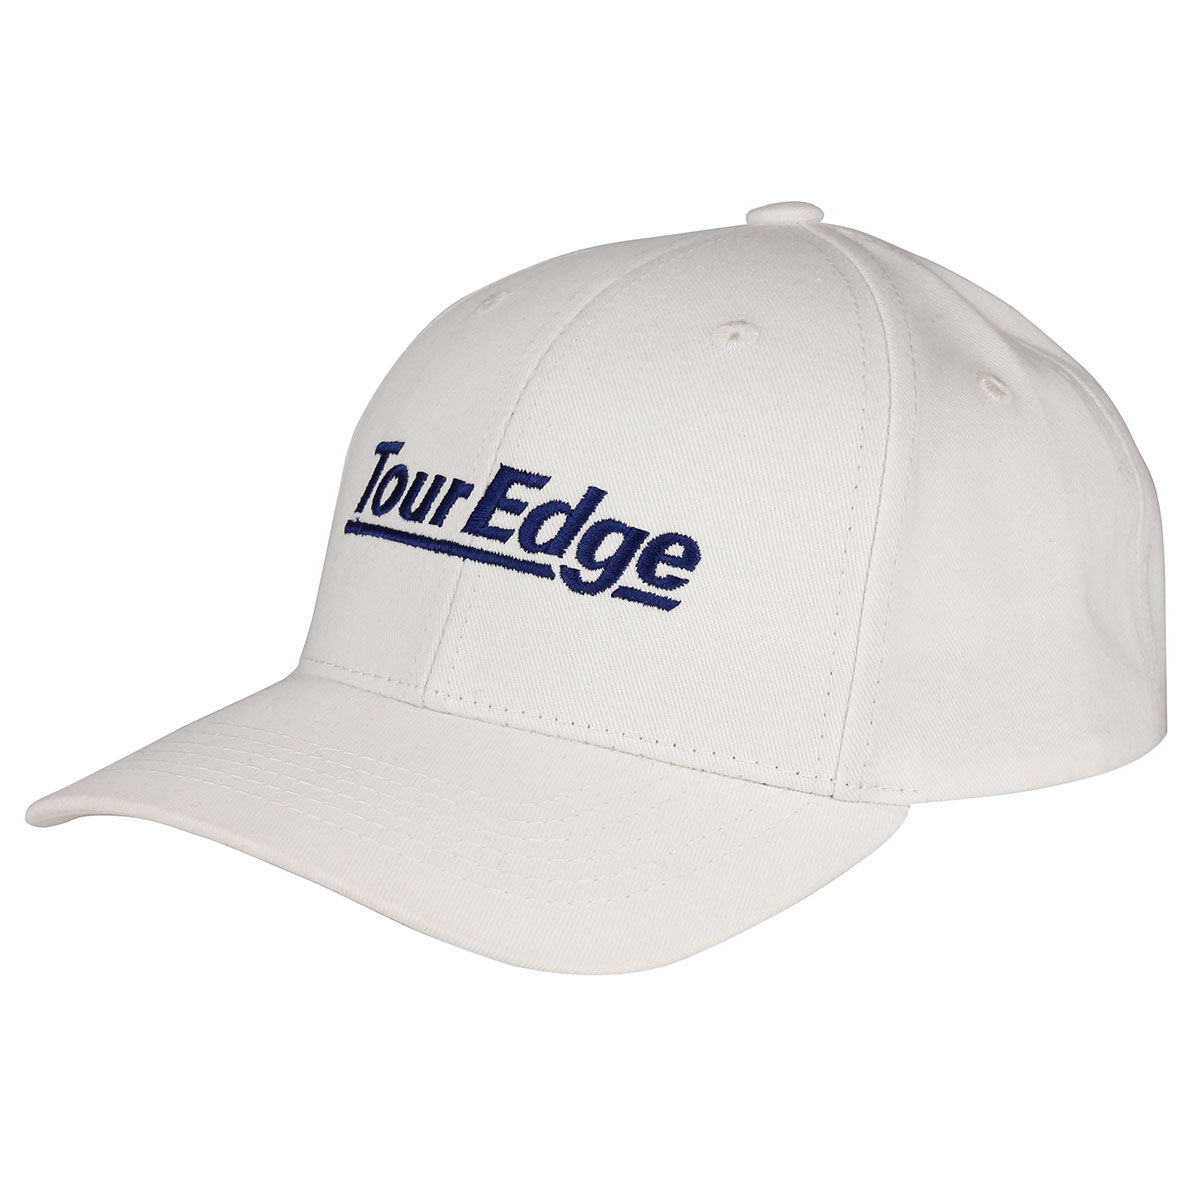 Tour Edge Men’s White and Black Embroidered Core Logo Golf Cap | American Golf, One Size